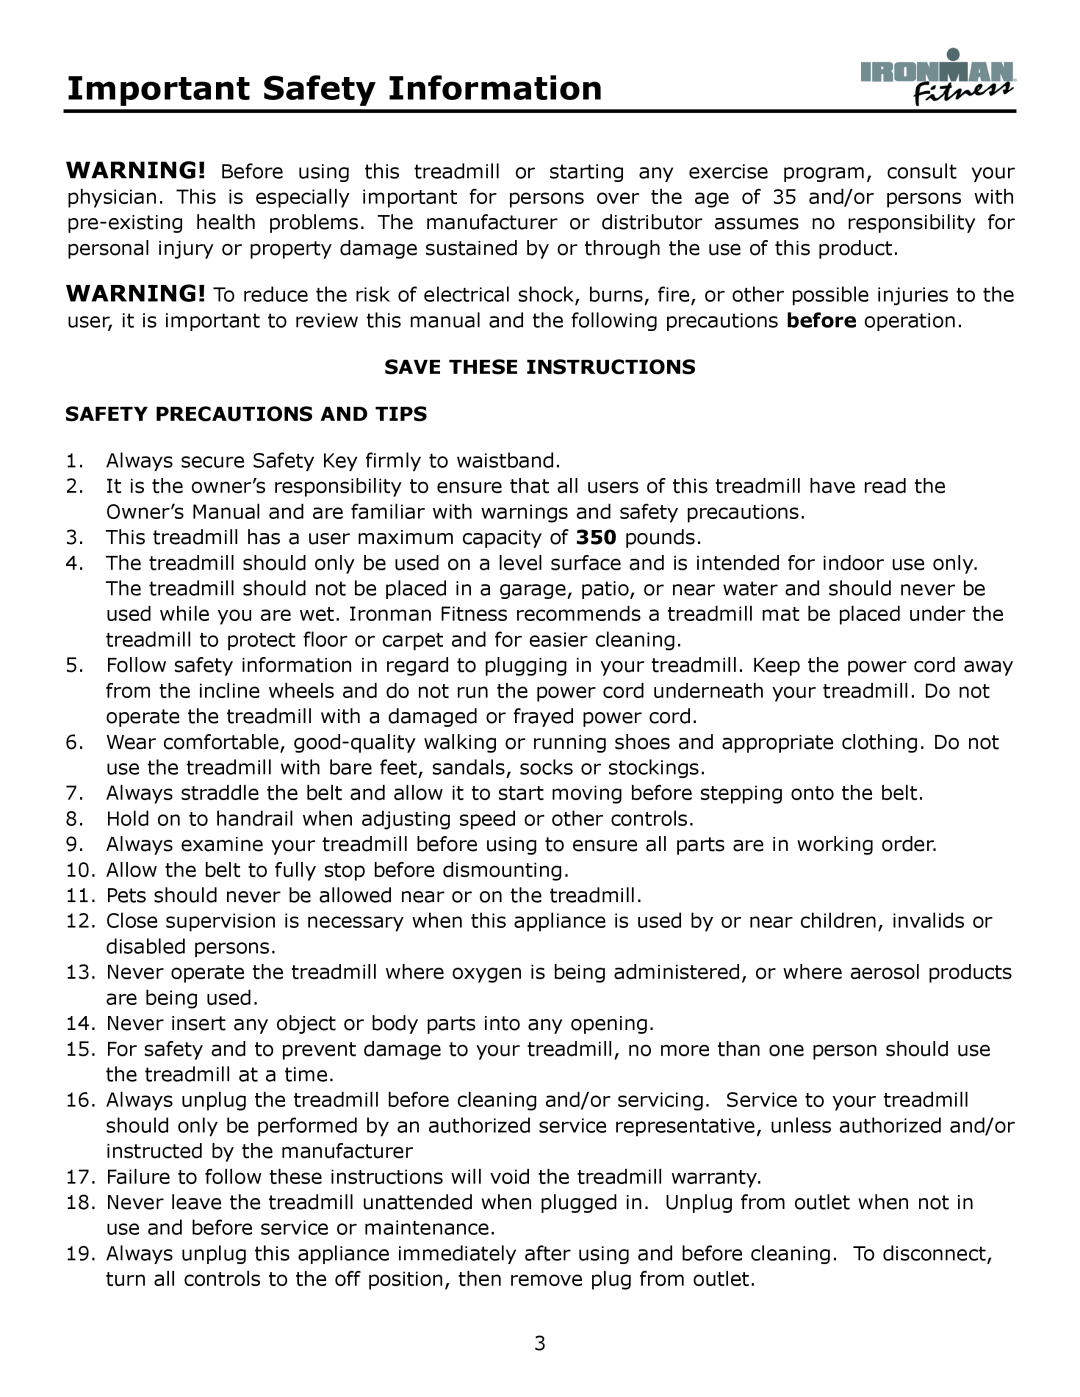 Ironman Fitness Envision owner manual Important Safety Information, Save These Instructions Safety Precautions And Tips 